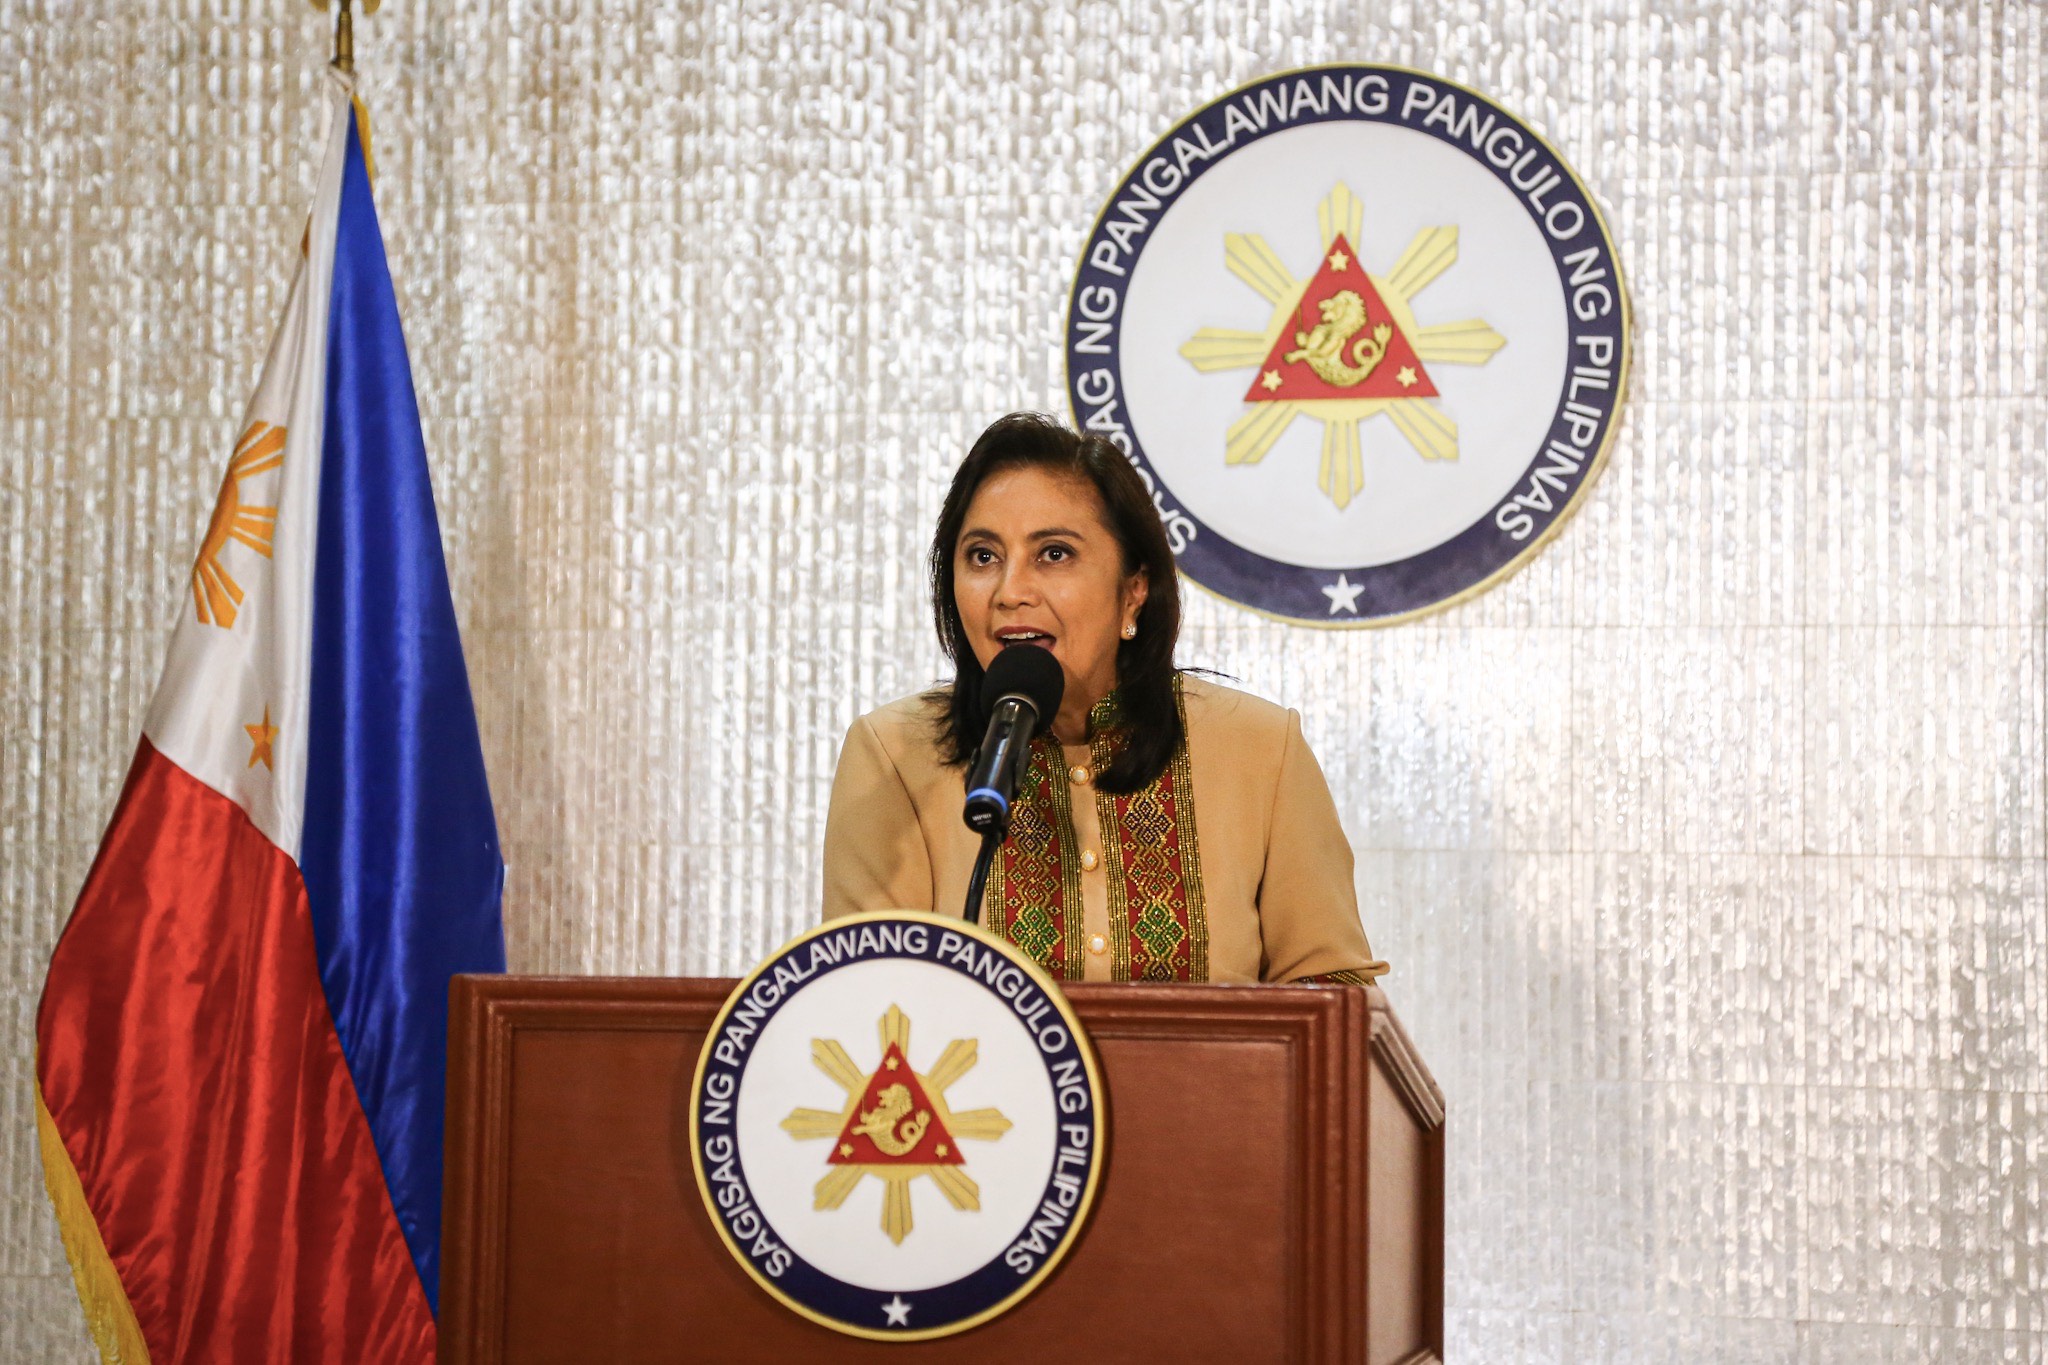 VICE PRESIDENT President Leni Robredo announces in a press conference on November 6, 2019, that she is accepting the anti-drug post offered by President Rodrigo Duterte. Photo by Jire Carreon/Rappler